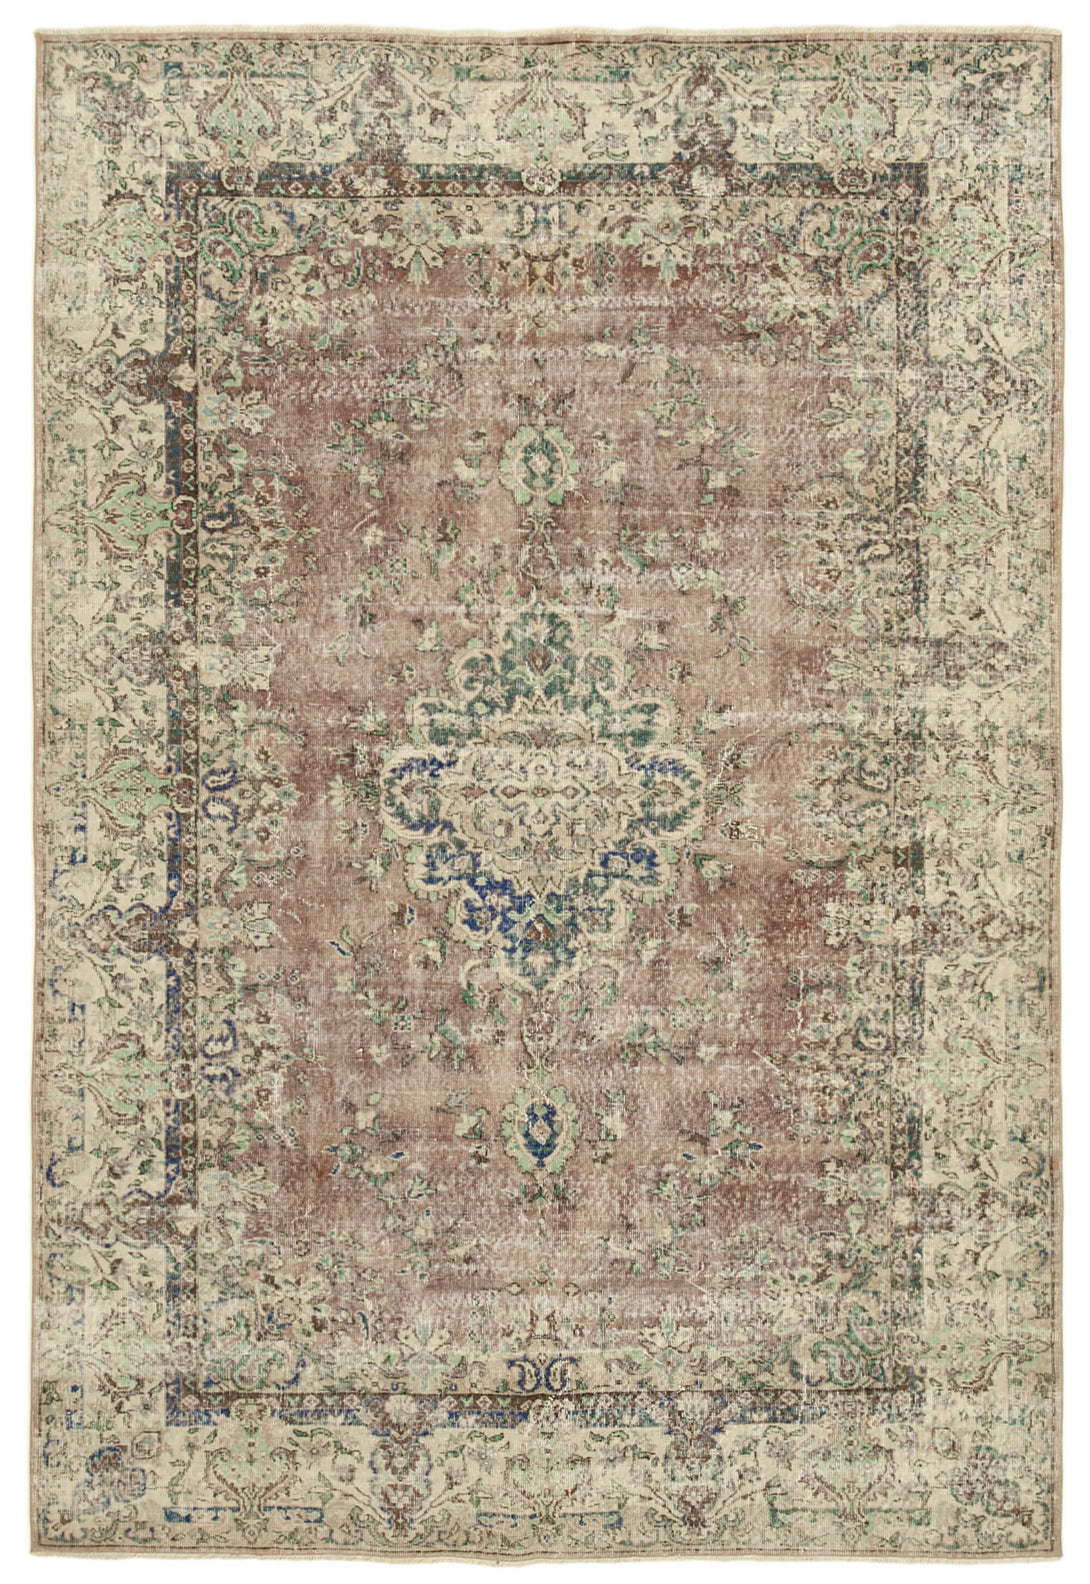 Handmade White Wash Area Rug > Design# OL-AC-38755 > Size: 6'-11" x 10'-5", Carpet Culture Rugs, Handmade Rugs, NYC Rugs, New Rugs, Shop Rugs, Rug Store, Outlet Rugs, SoHo Rugs, Rugs in USA